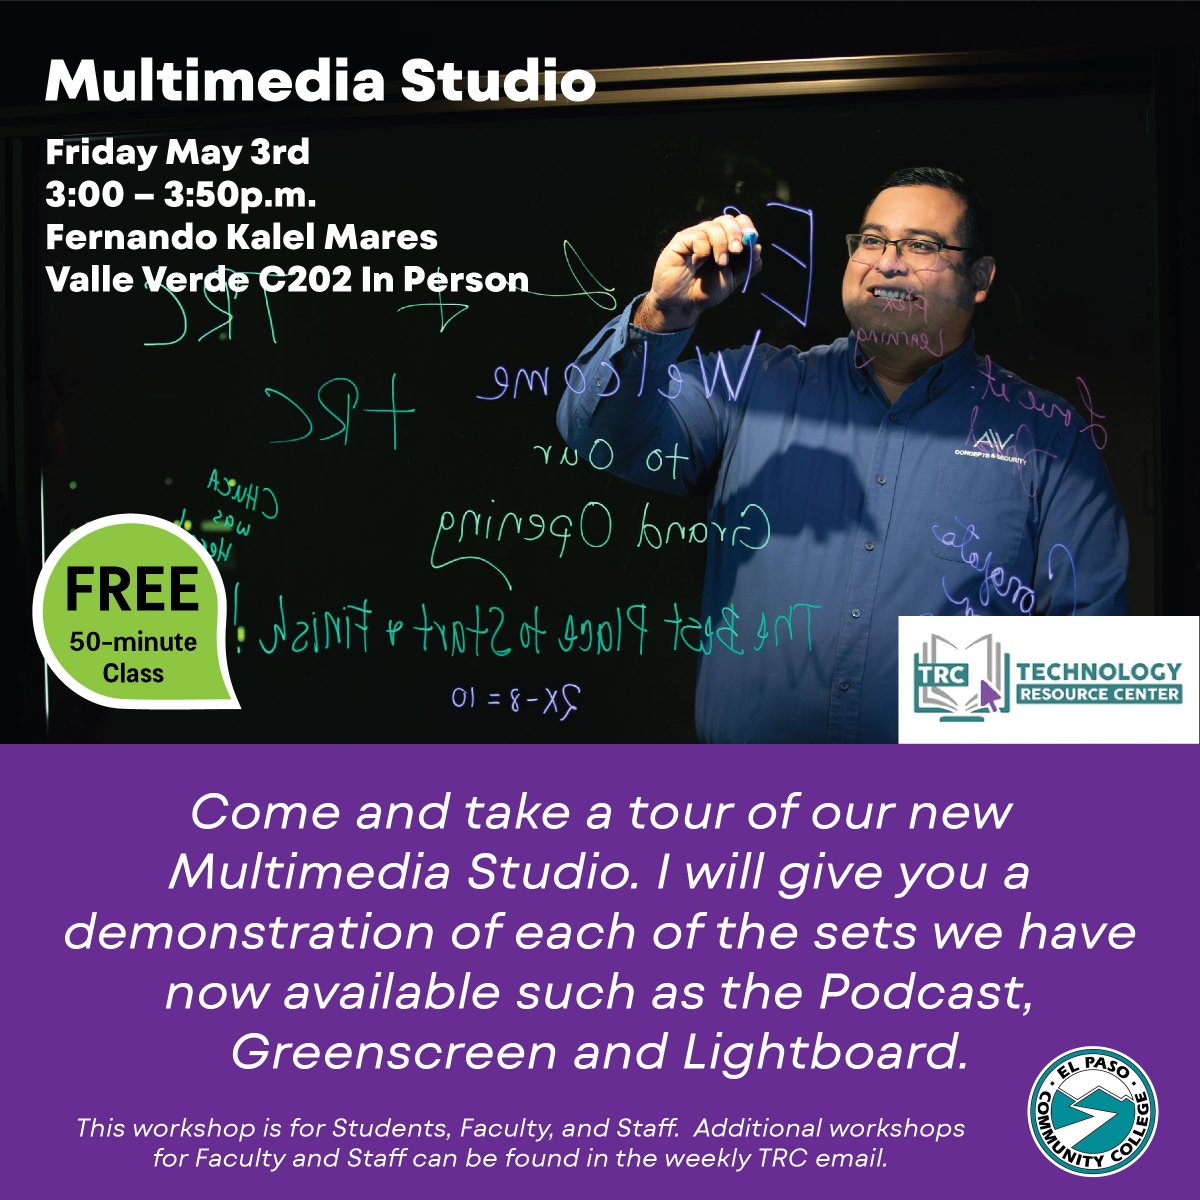 Learn about EPCC's Multimedia Studio on May 3 from 3:00 - 3:50 p.m. at the Valle Verde campus room C202.